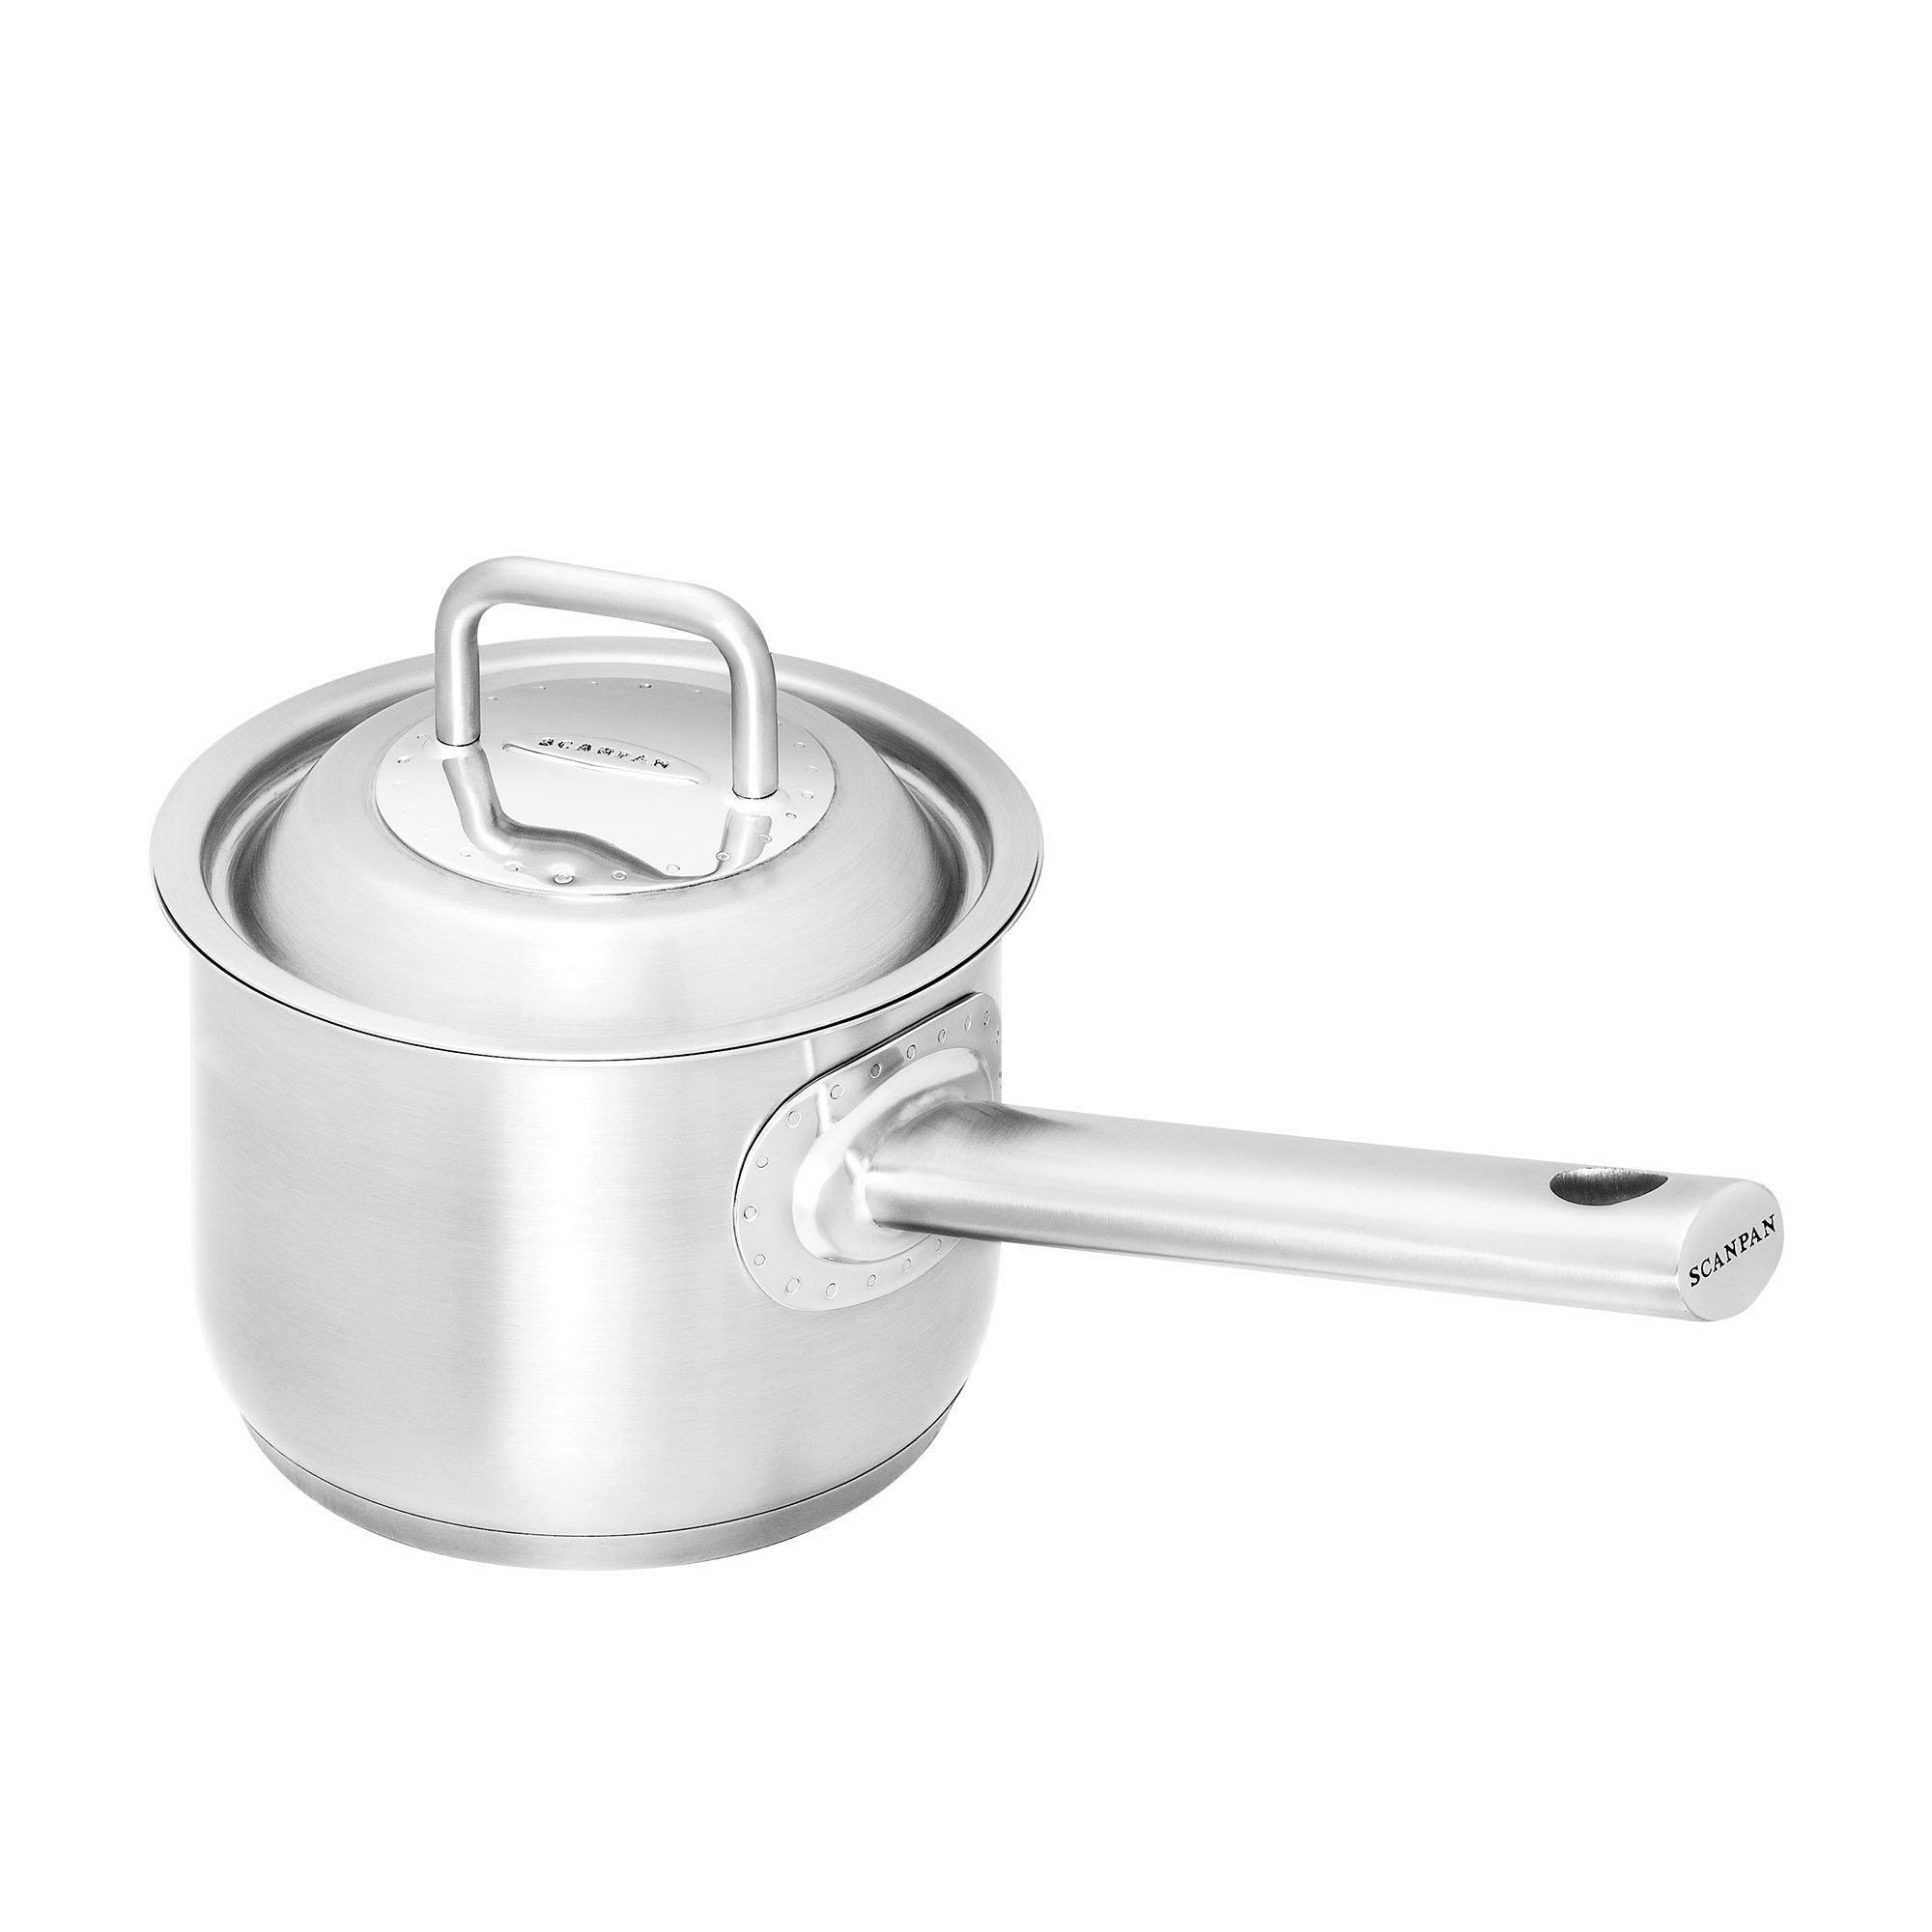 Scanpan Commercial 3pc Stainless Steel Saucepan Set Image 2